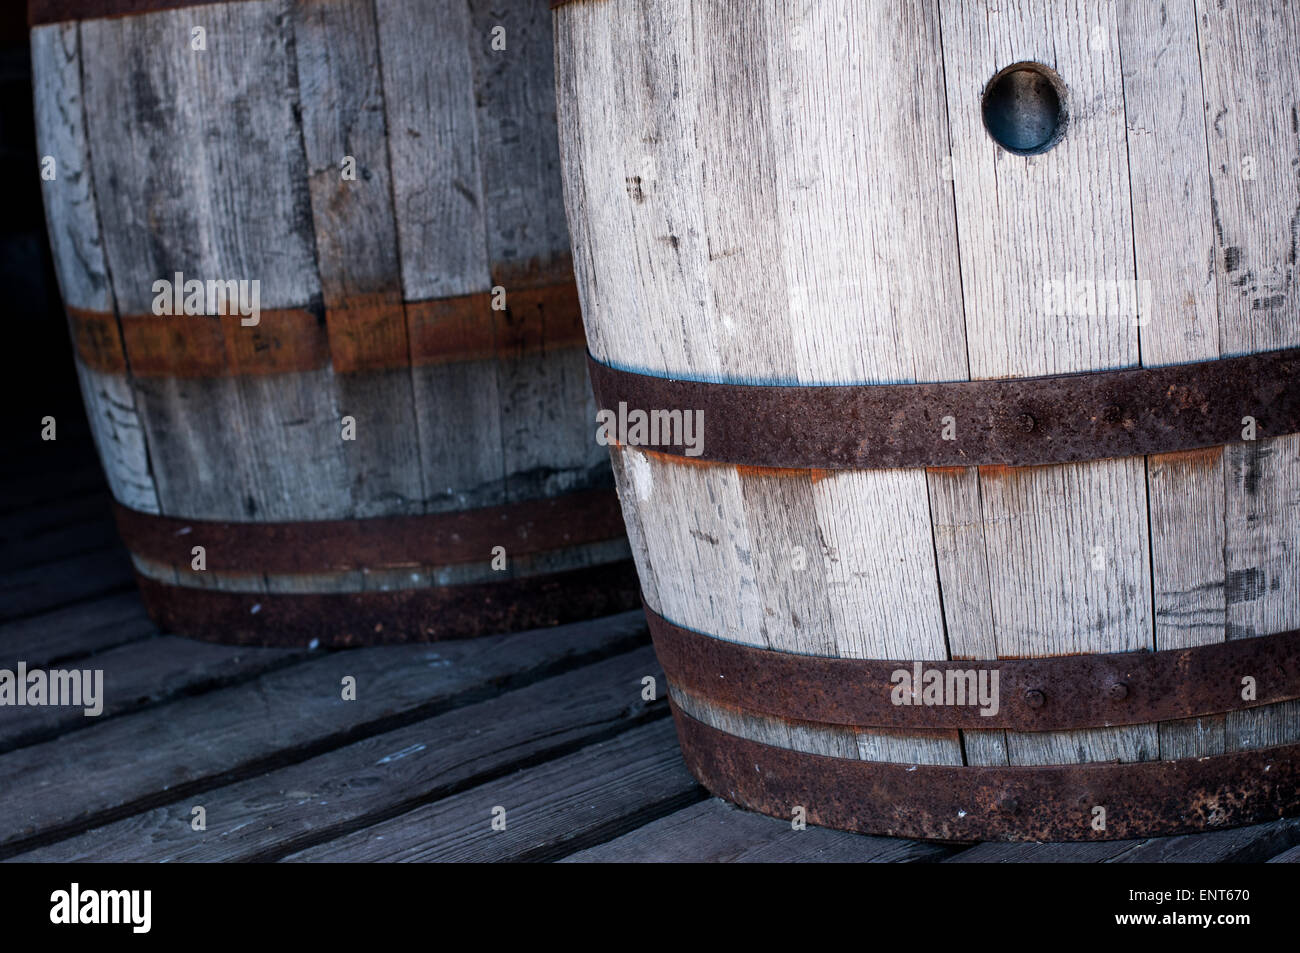 Two old, wooden barrels on a barn floor Stock Photo